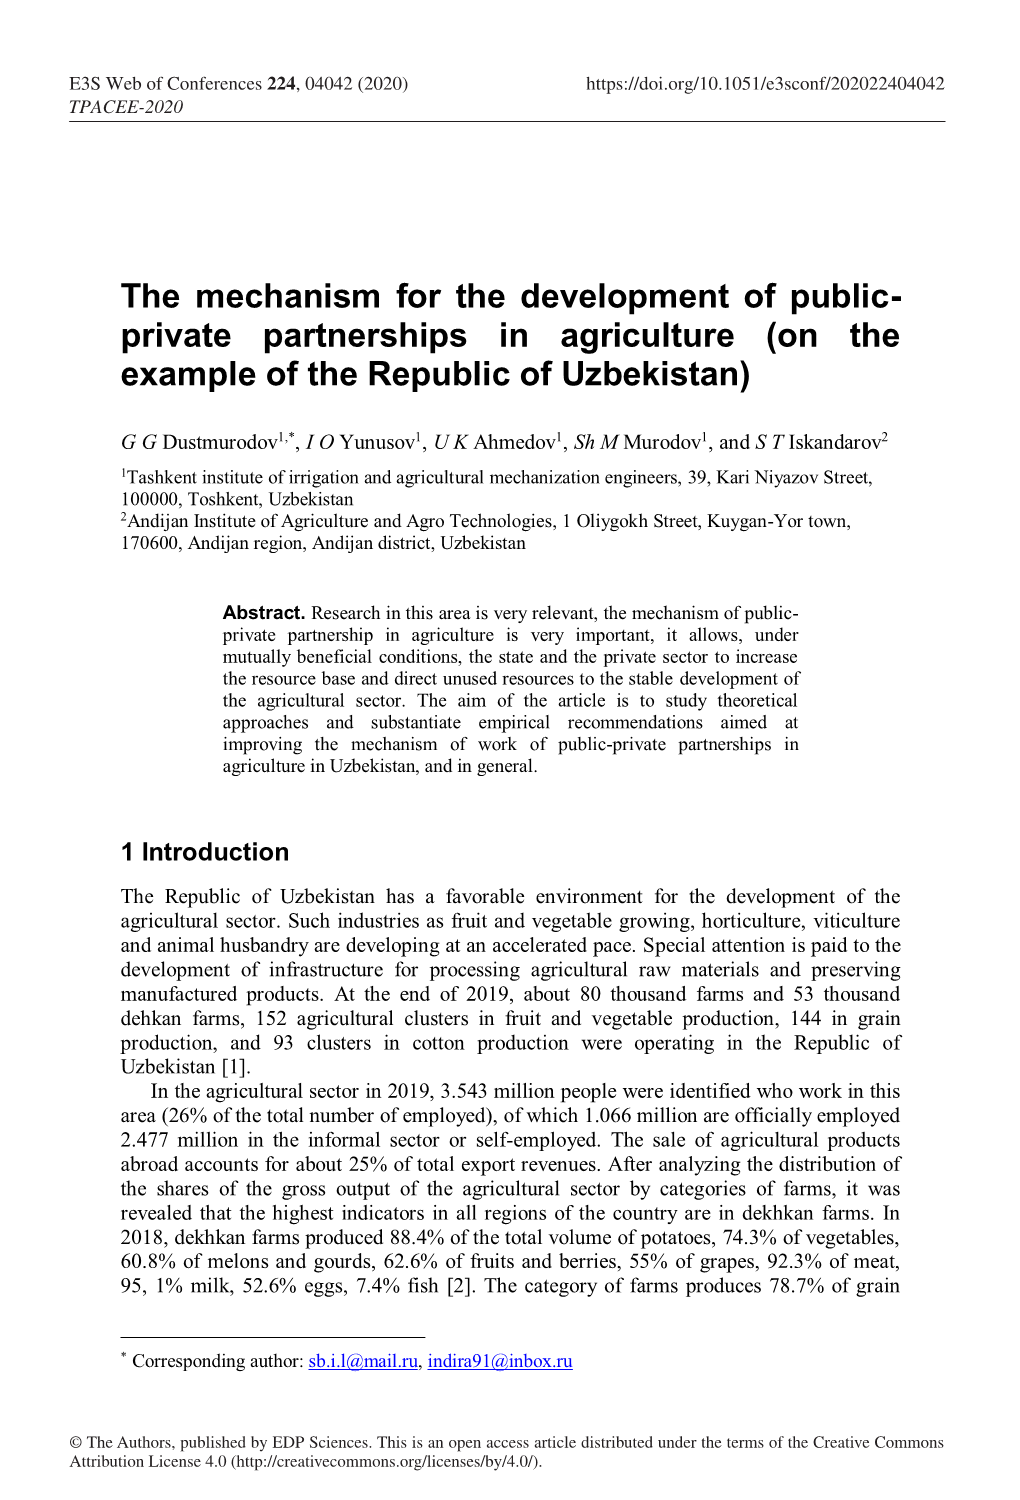 The Mechanism for the Development of Public-Private Partnerships In